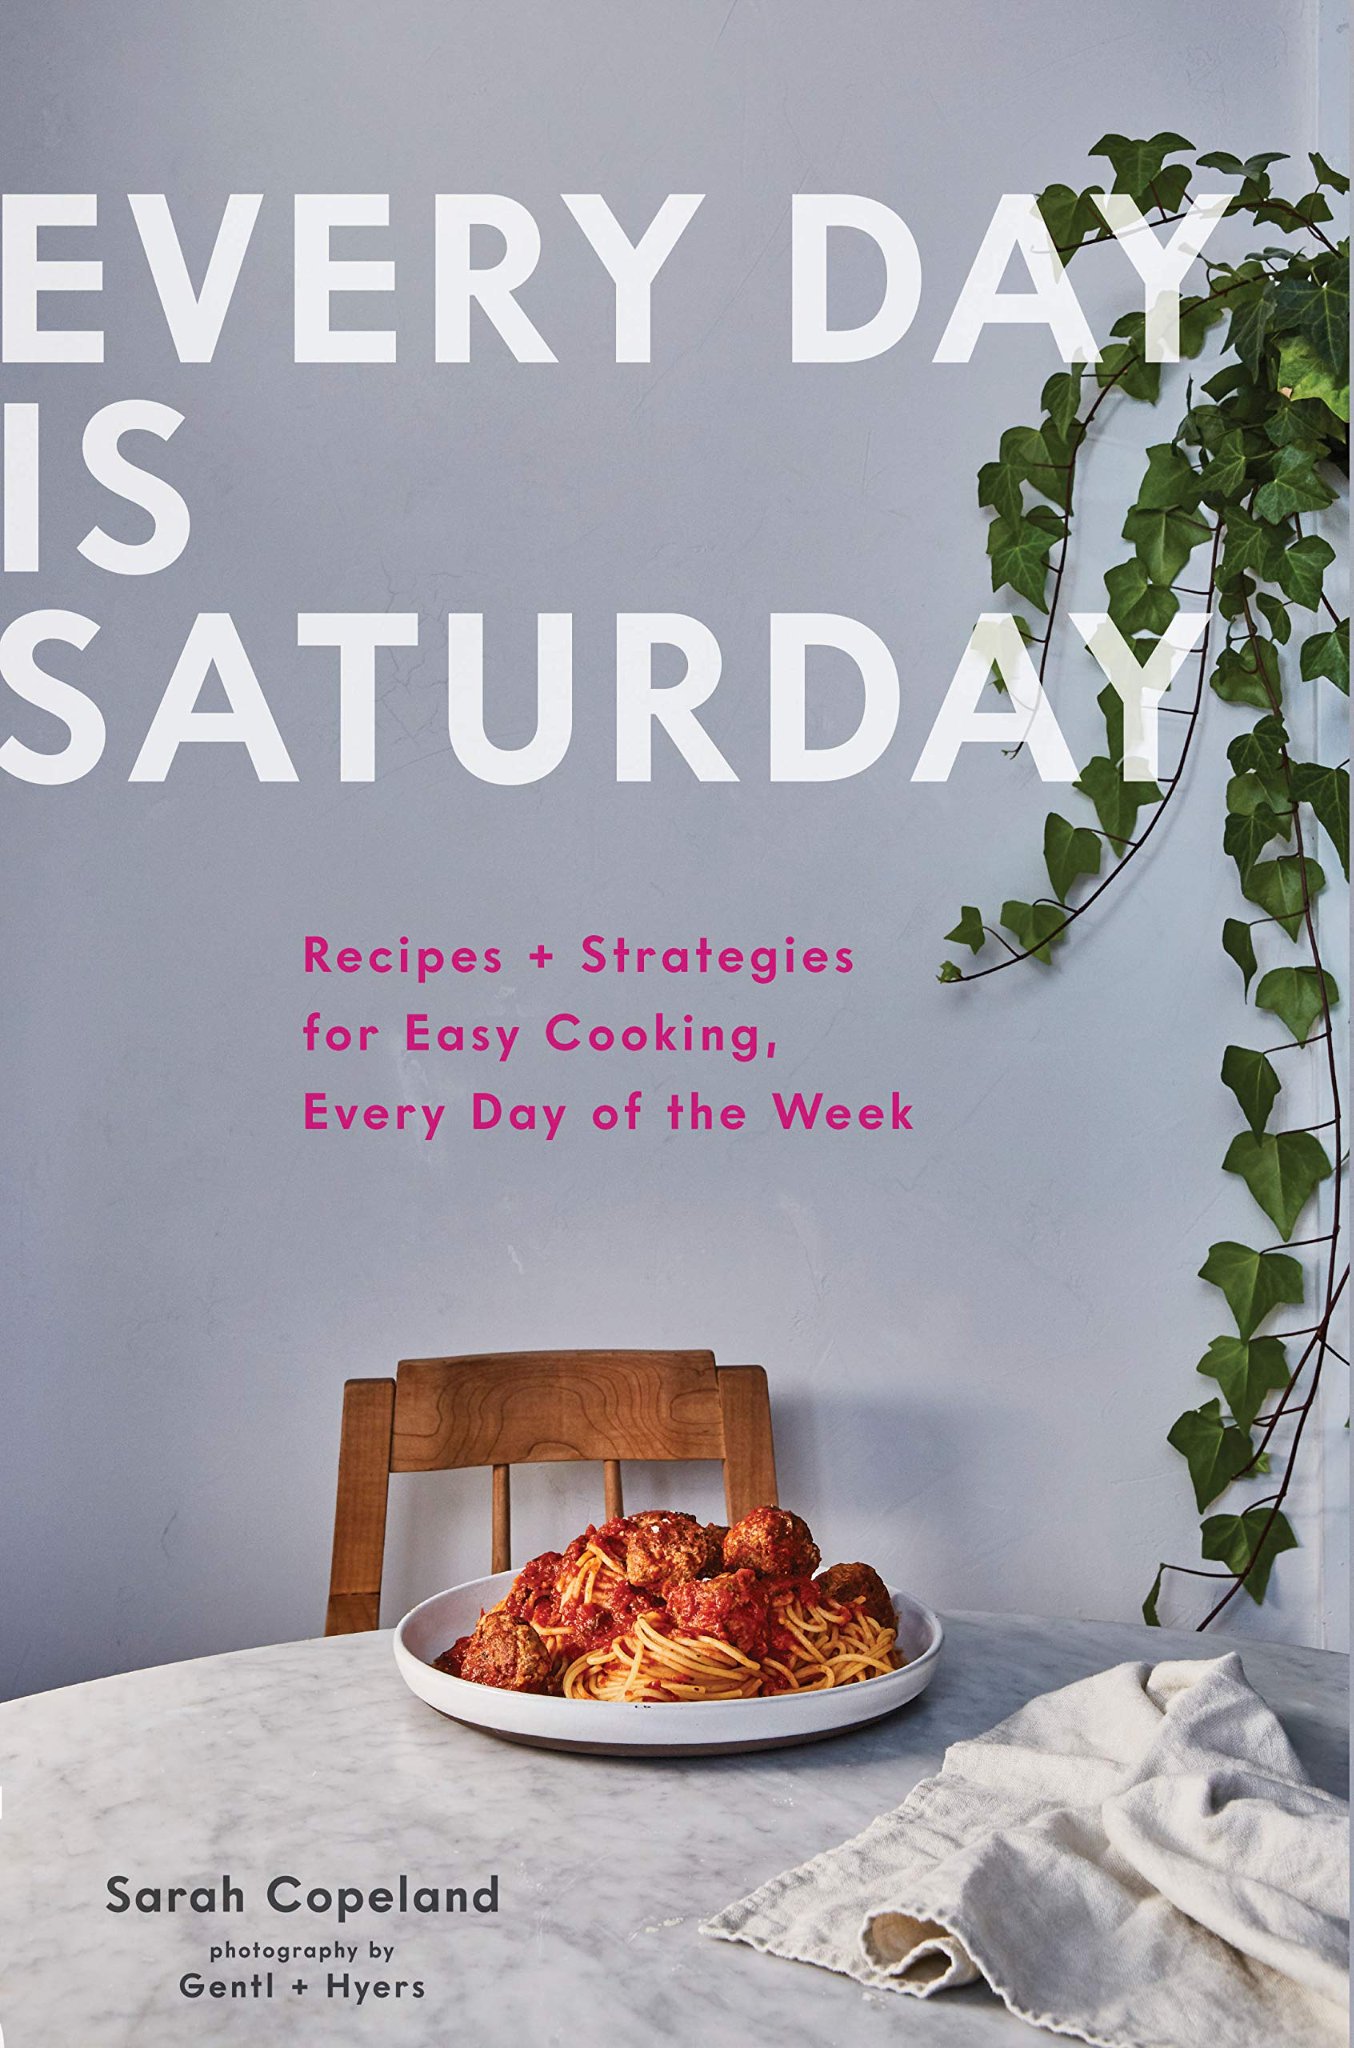 Every Day Is Saturday, by Sarah Copeland